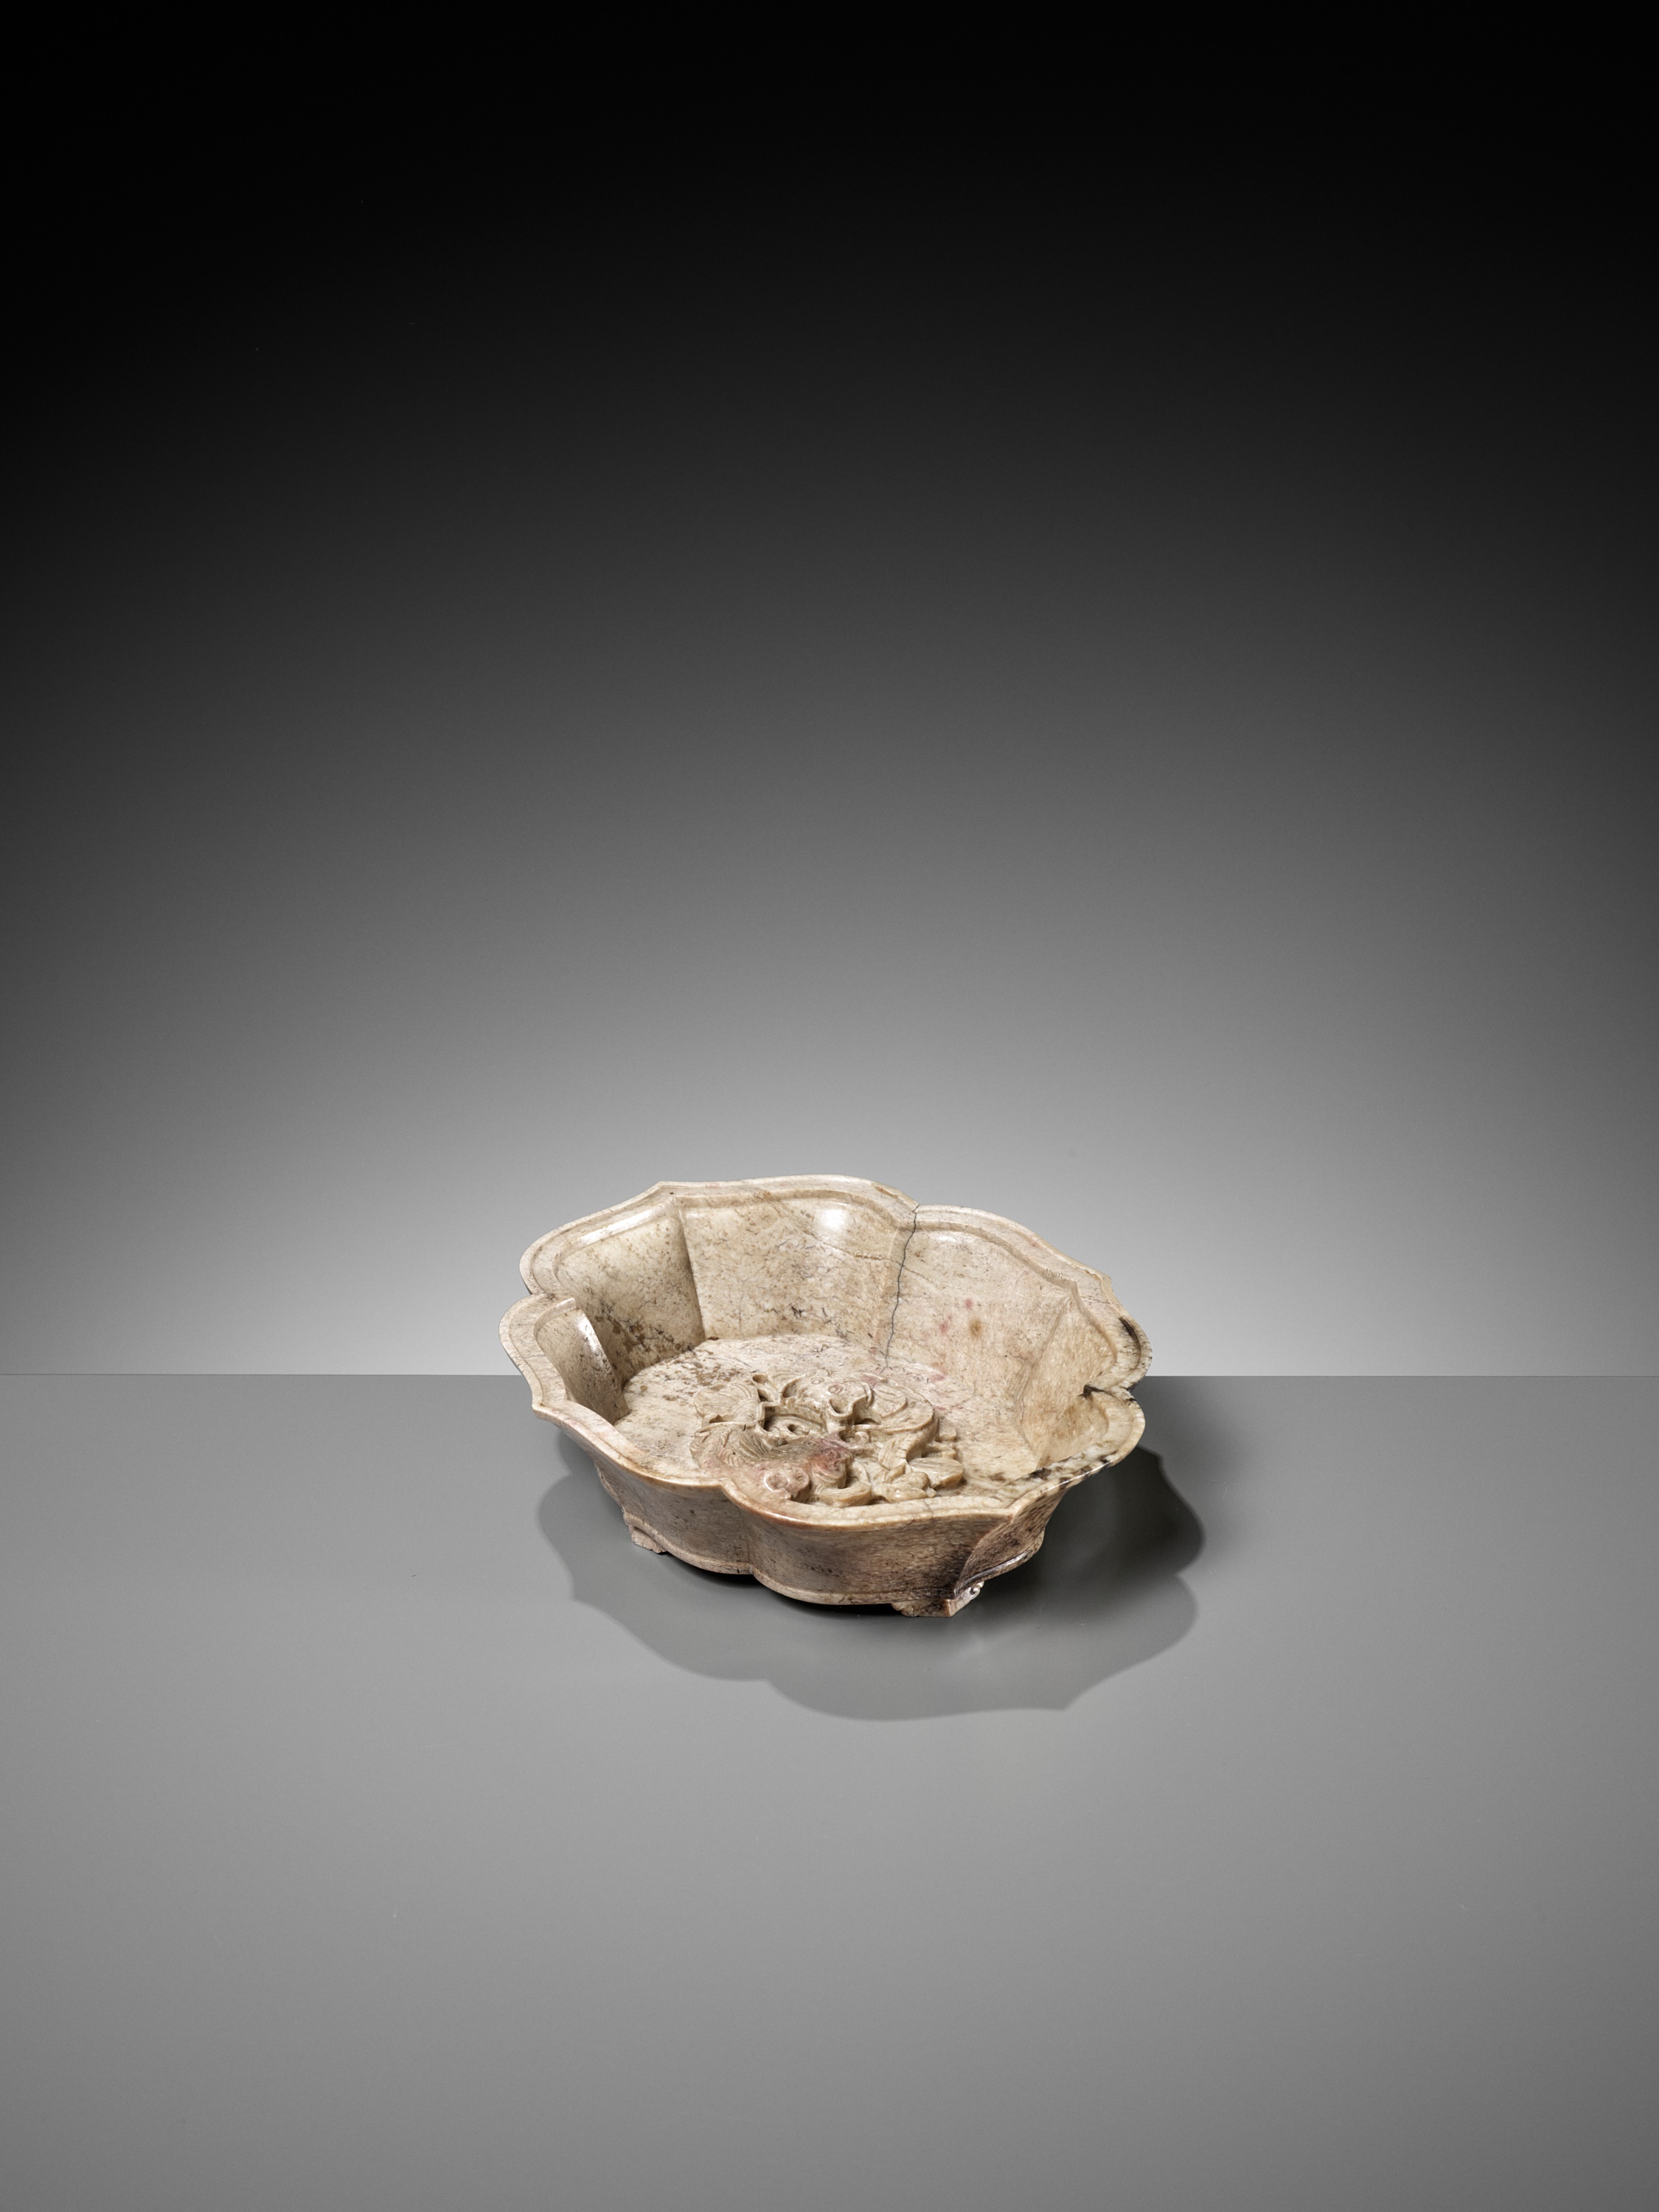 A CHICKEN BONE JADE 'DOUBLE FISH' MARRIAGE BOWL, 17TH-18TH CENTURY - Image 12 of 16